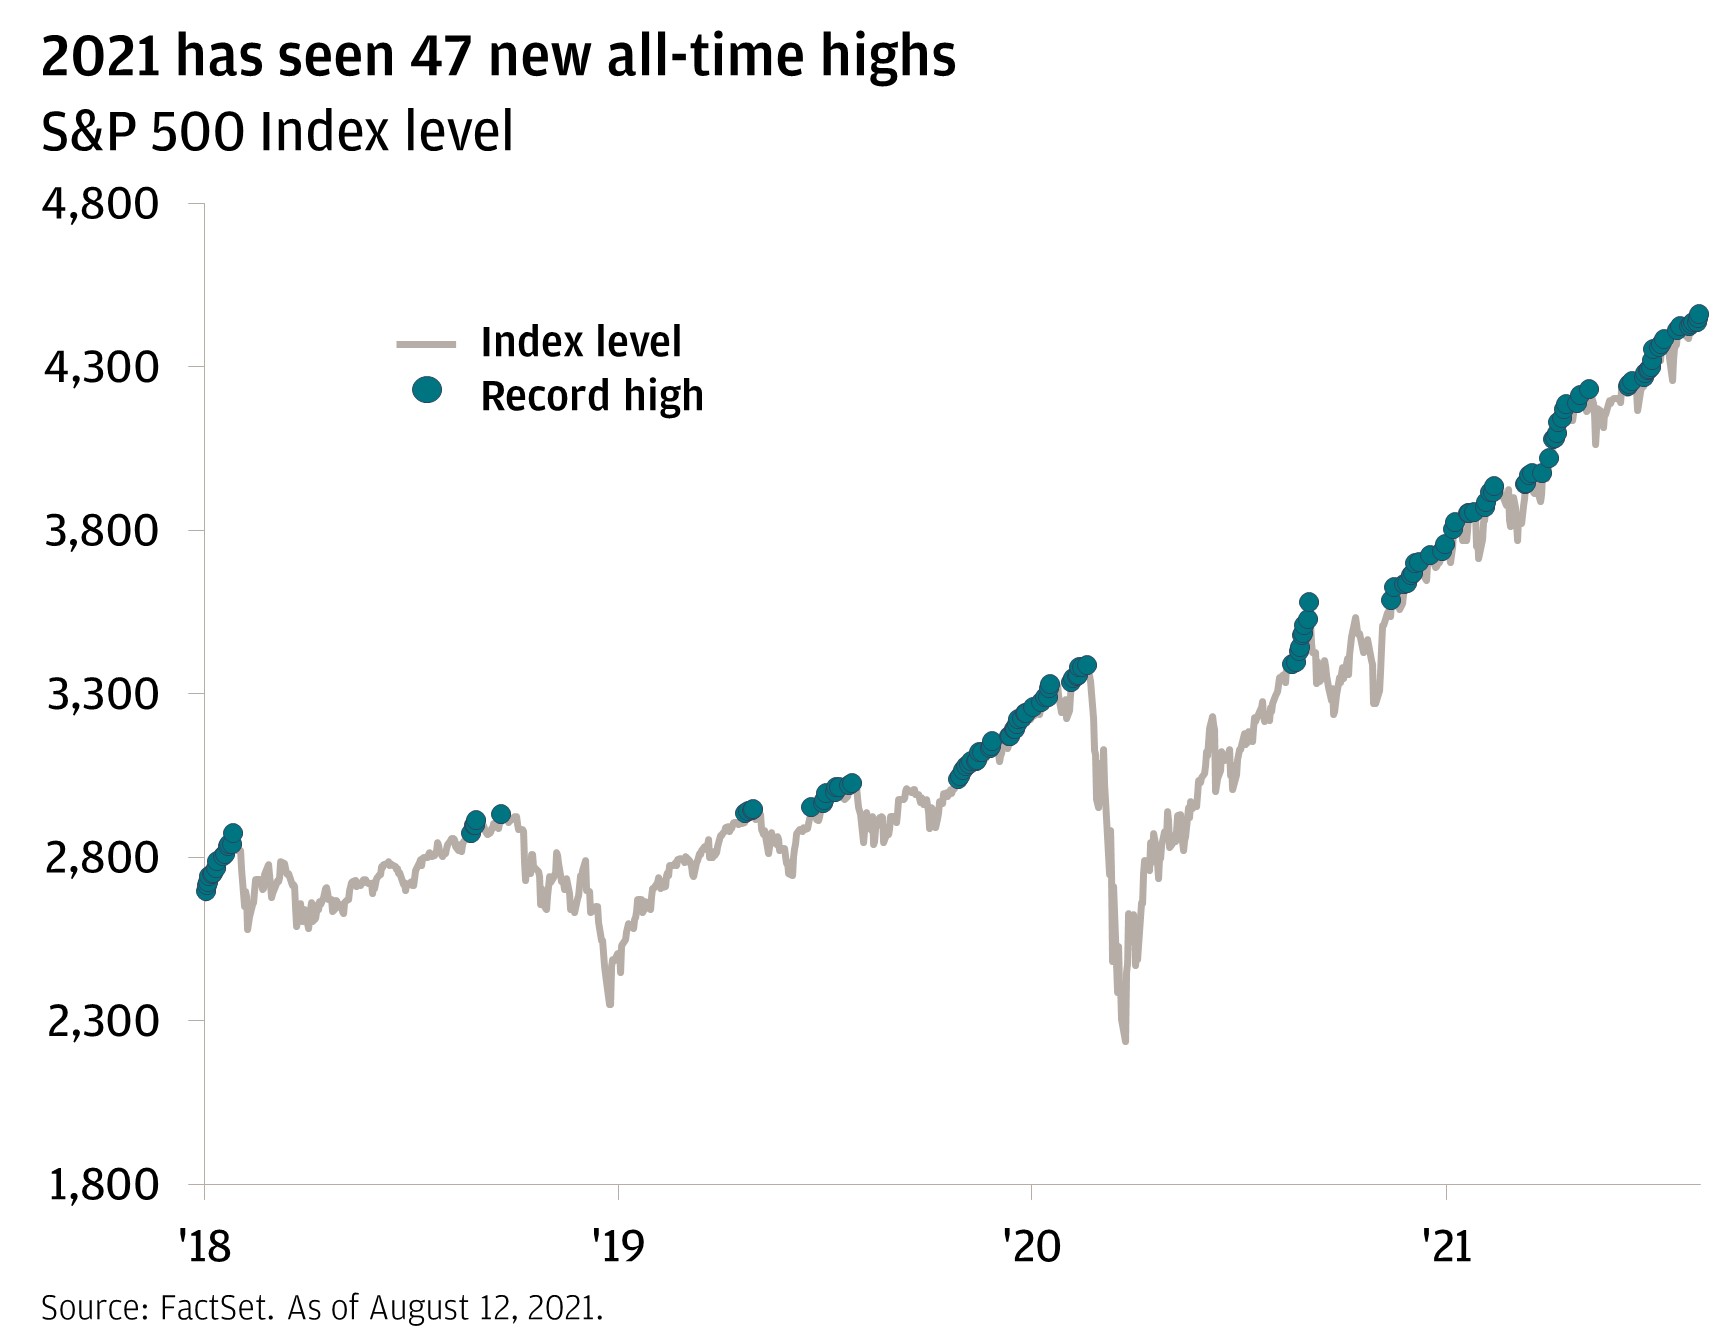 This chart shows the performance of the S&P 500 index and shows when a new all-time high has occurred for the index from January 02, 2018 to August 12, 2021. It shows that the index started at approximately 2695 on January 02, 2018 and then goes up to approximately 2872 on January 26, 2018 (13 all-time highs in between). On February 08, 2018 there is a drop to approximately 2600. There is then a rally up to approximately 2900 on September 20, 2018 (5 all-time highs in between). There is then a drop to approximately 2350 on December 25, 2018. There is then a rally up to approximately 3386 on February 19, 2020 (33 all-time highs in between). There is then a steep drop to approximately 2237 on March 23, 2020. This is then followed by a steep rally (61 all-time highs in between) to approximately 4460 on August 12, 2021.